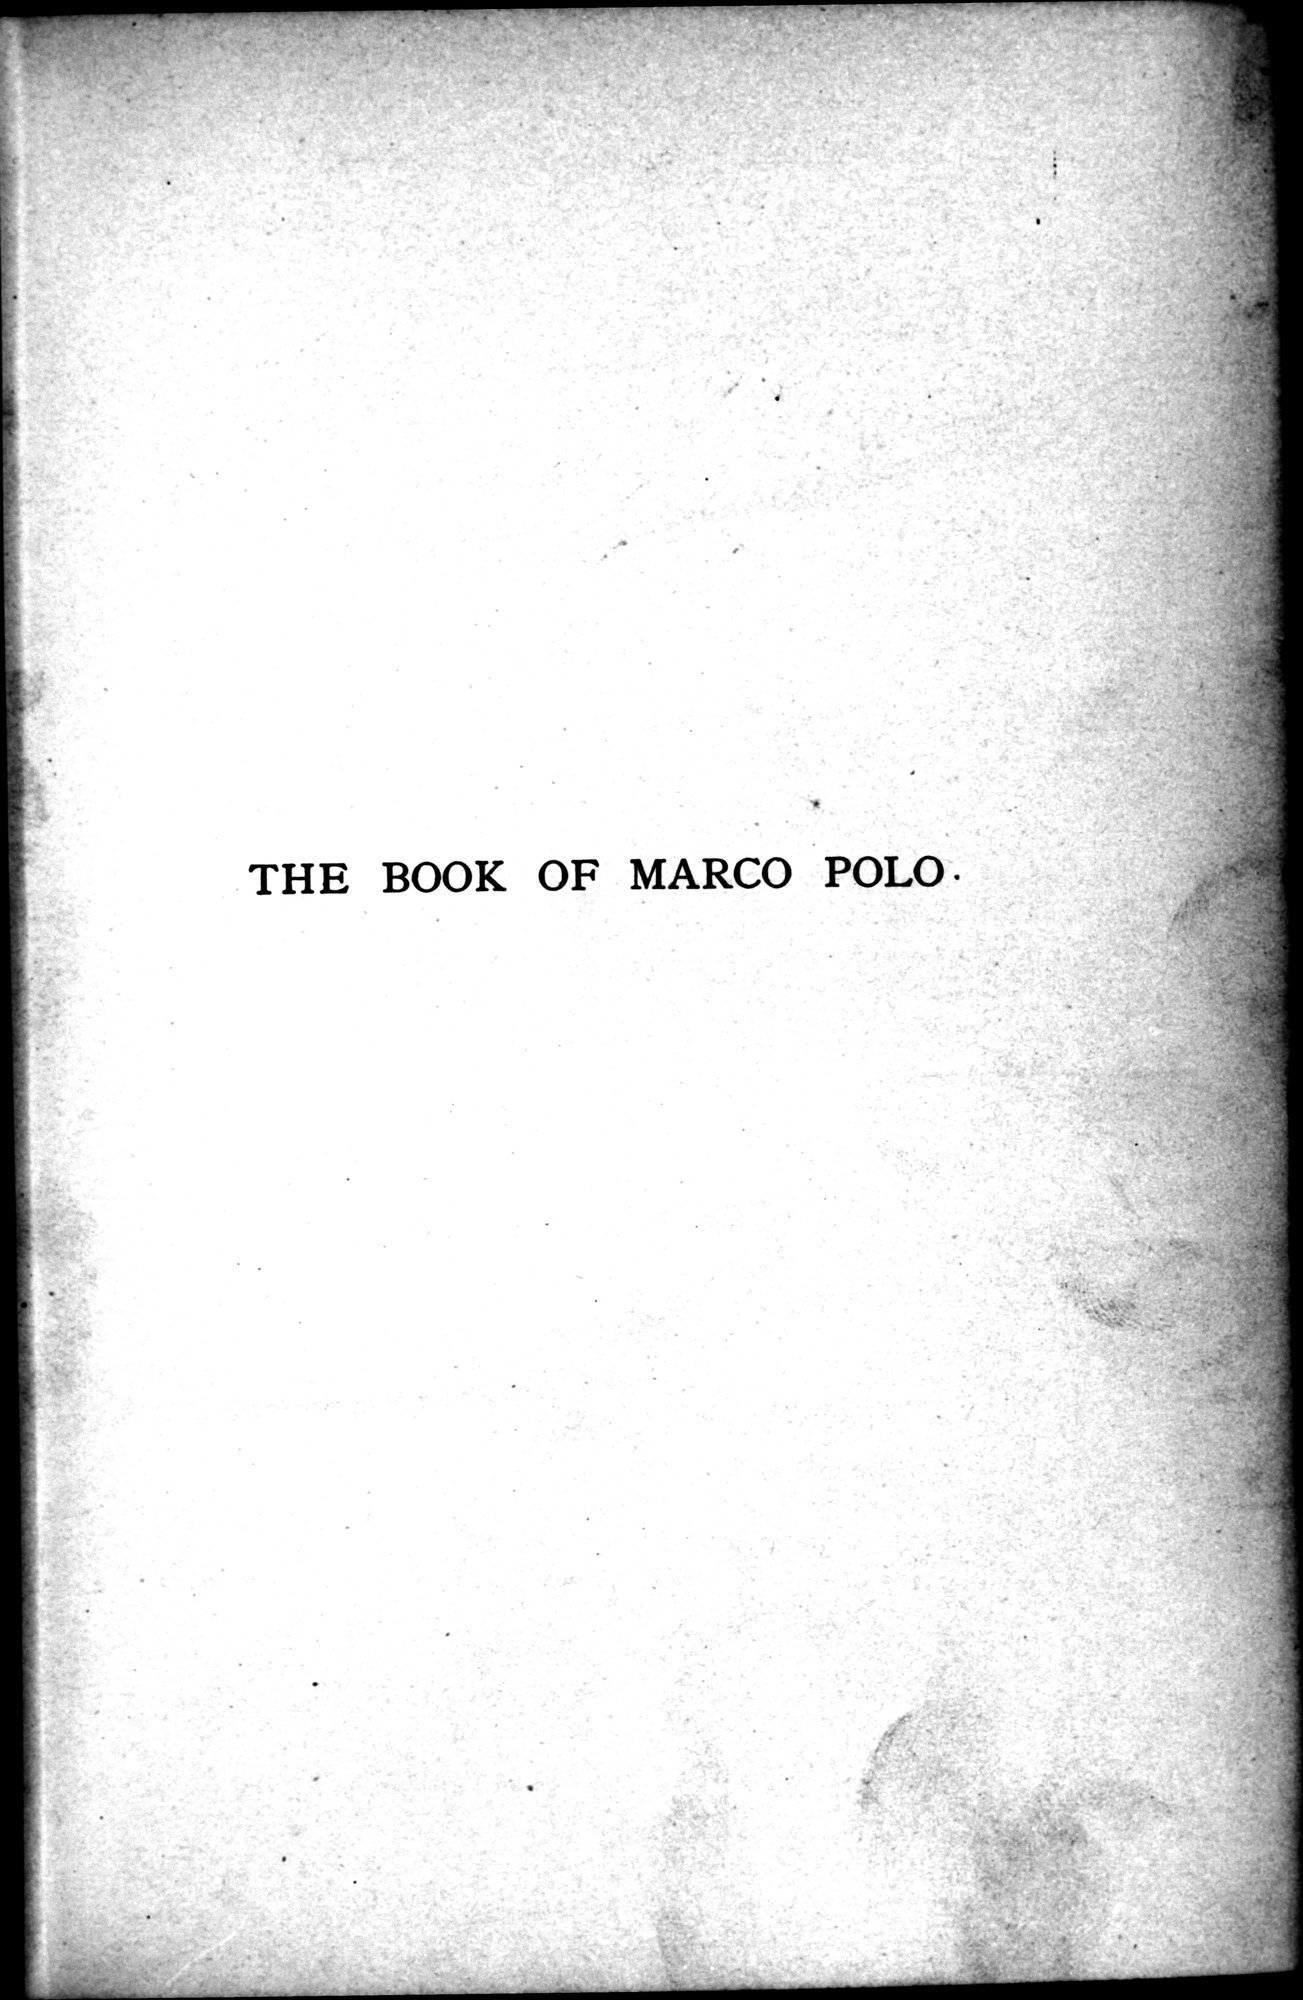 The Book of Ser Marco Polo : vol.2 / 31 ページ（白黒高解像度画像）